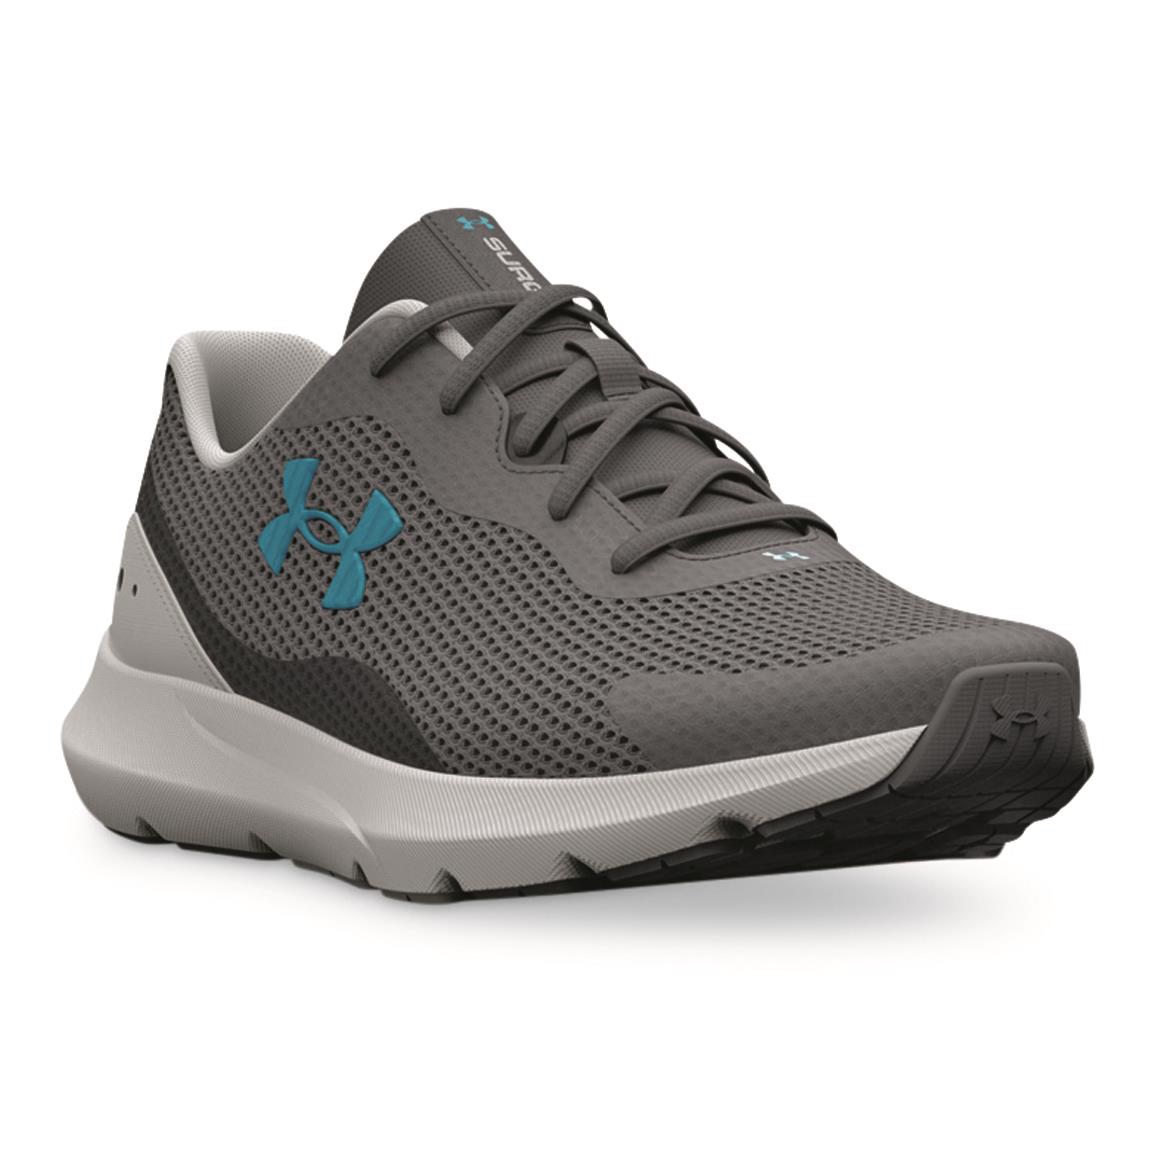 Under Armour Men's Surge 3 Running Shoes, Pitch Gray/mod Gray/blue Surf